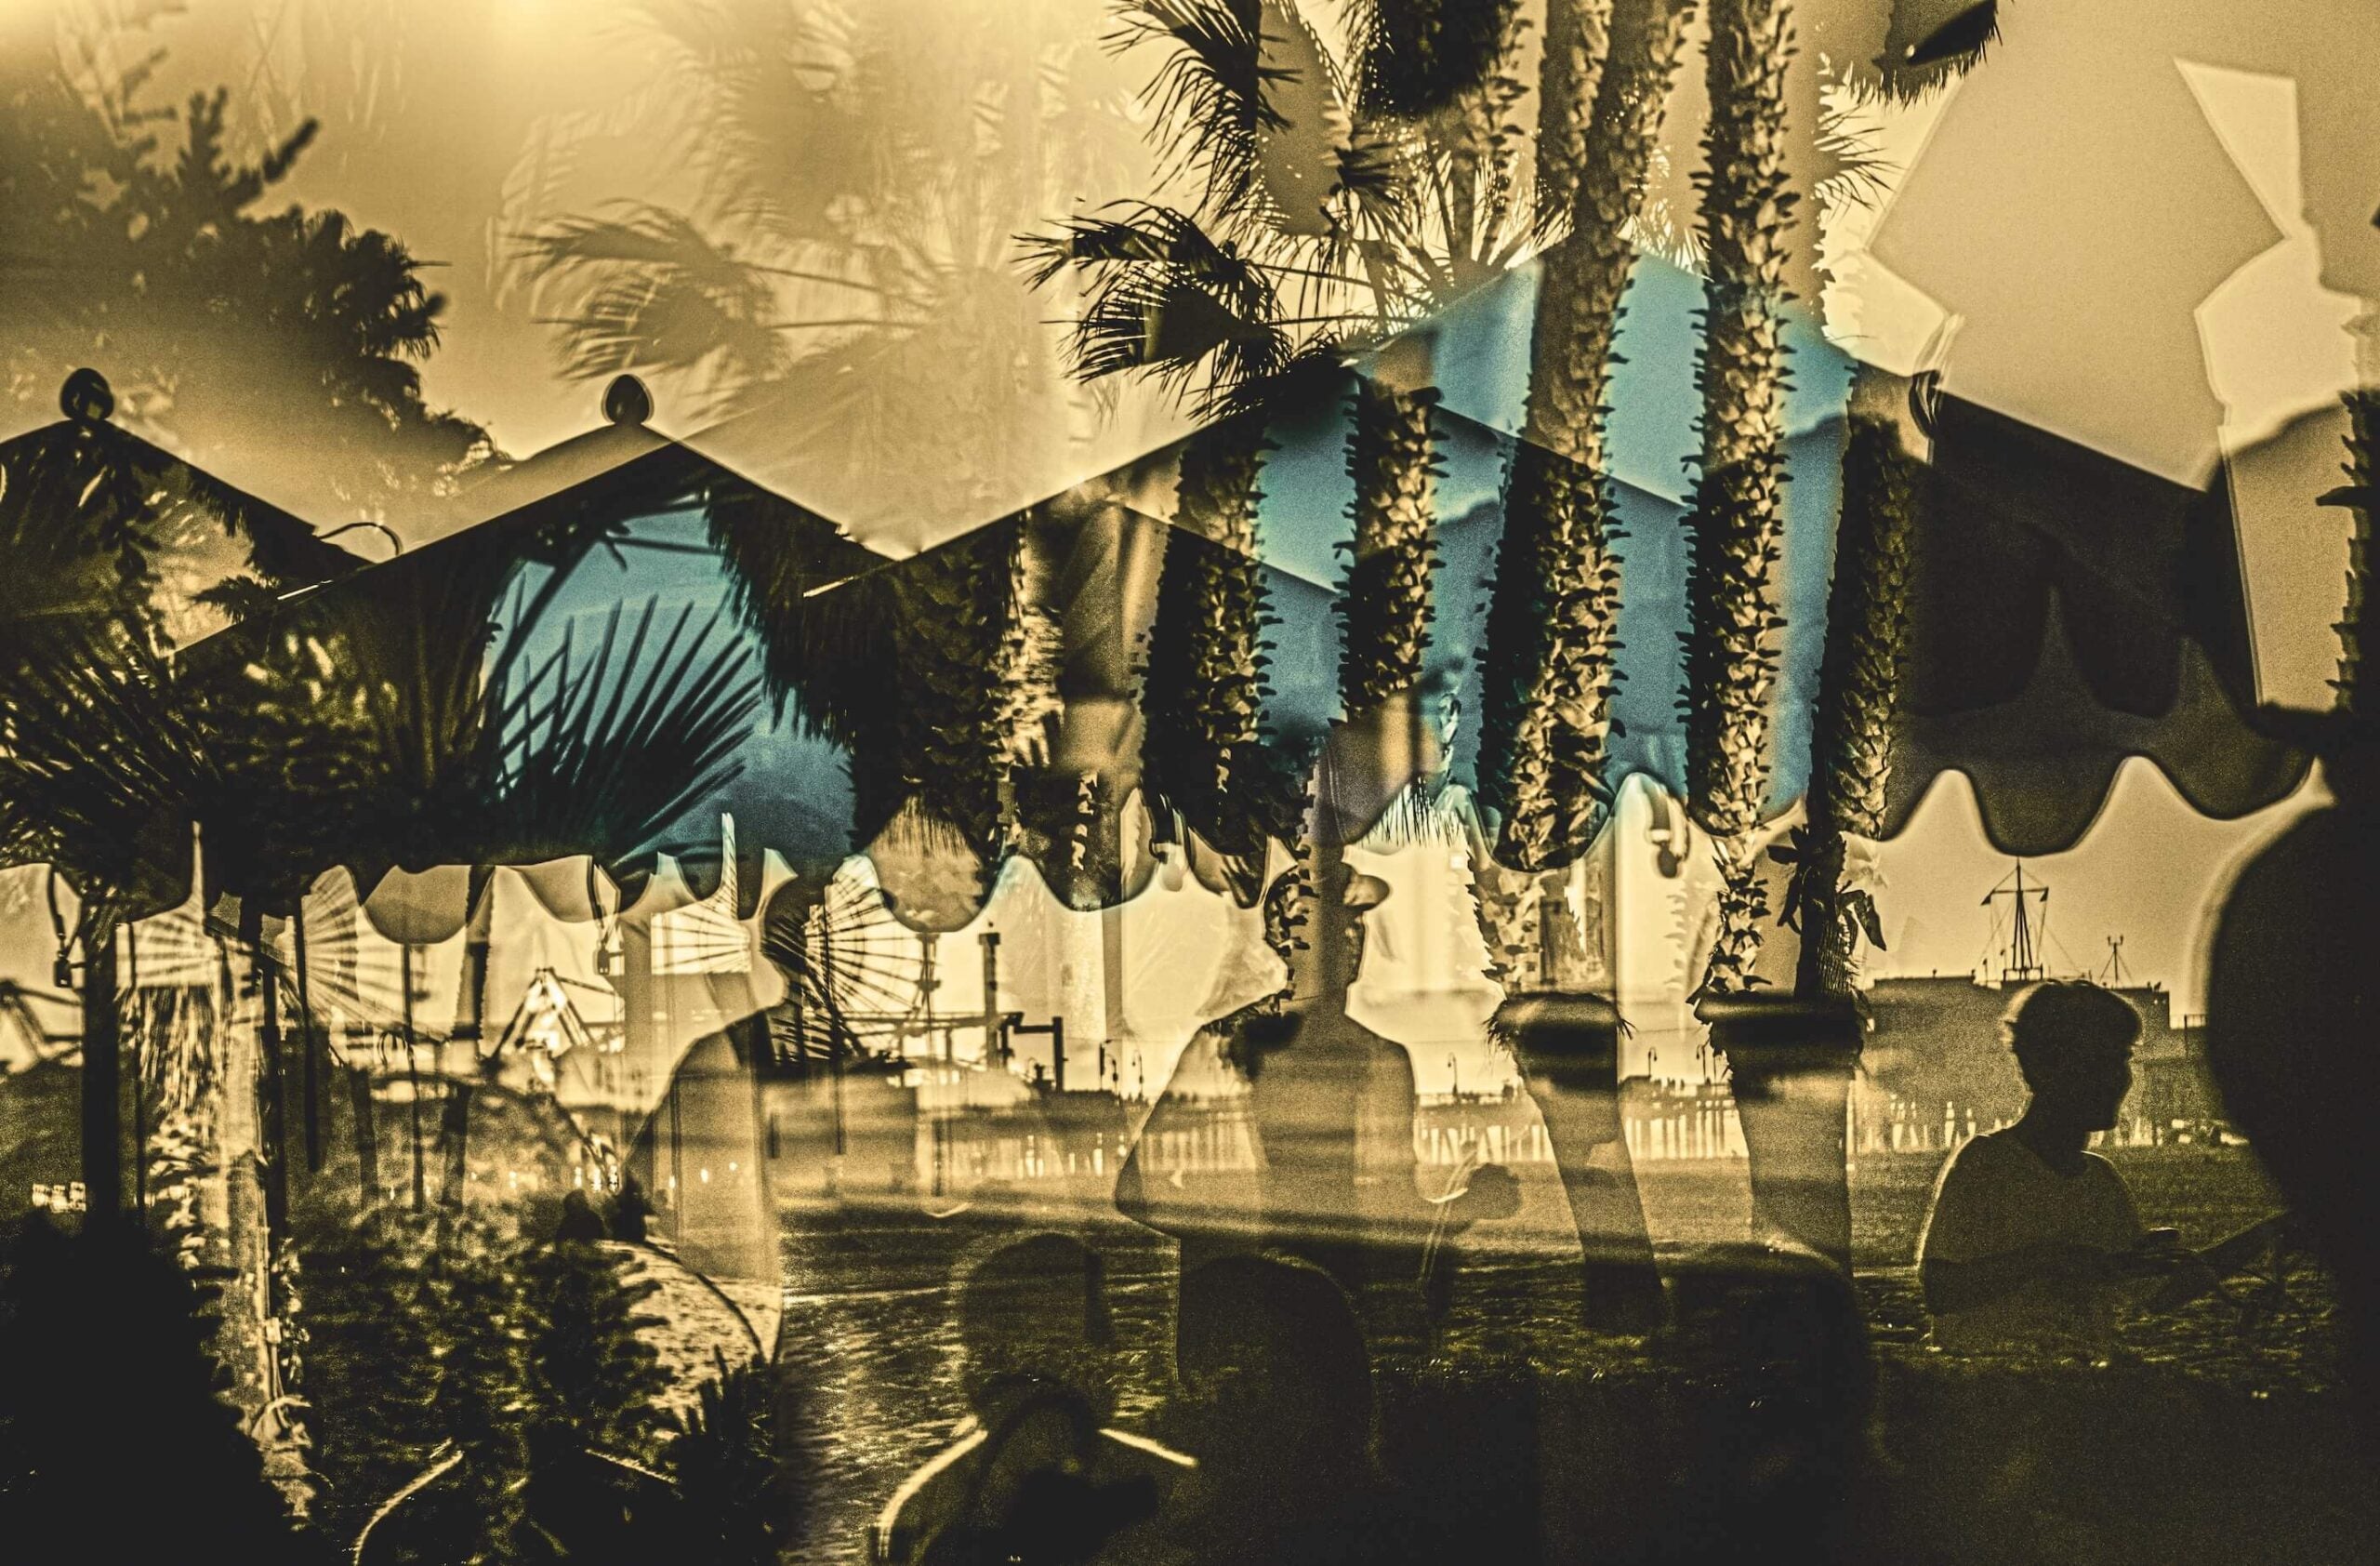 multiple exposure photograph of palm trees and blue beach umbrellas